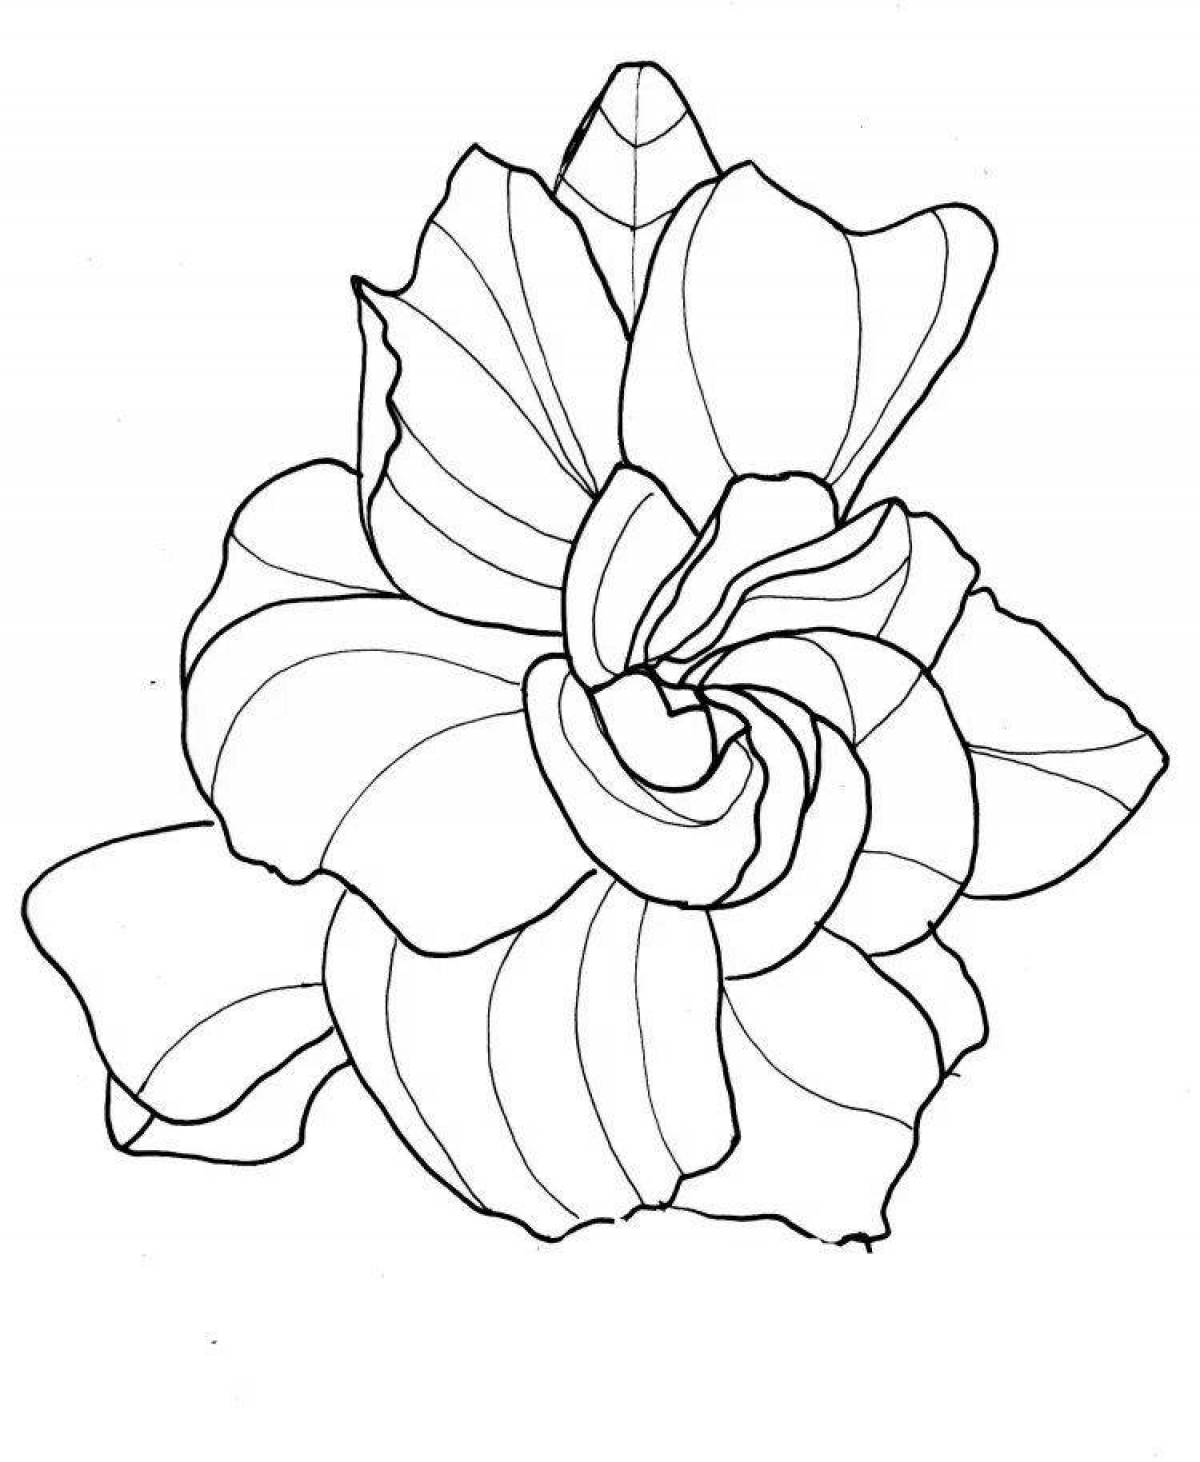 Amazing stone flower coloring page